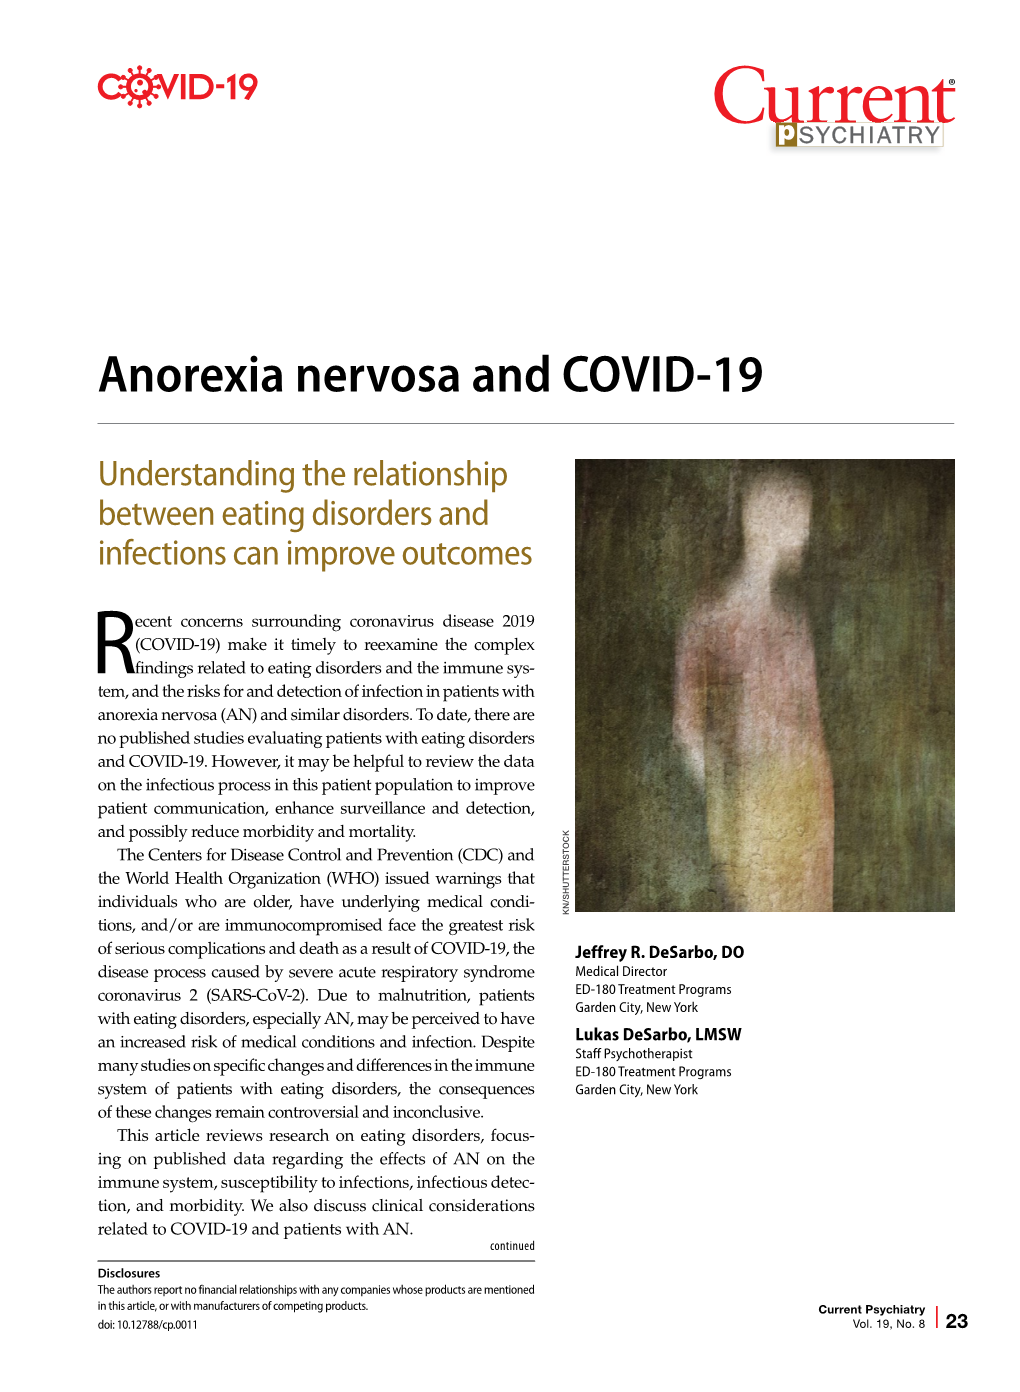 Anorexia Nervosa and COVID-19